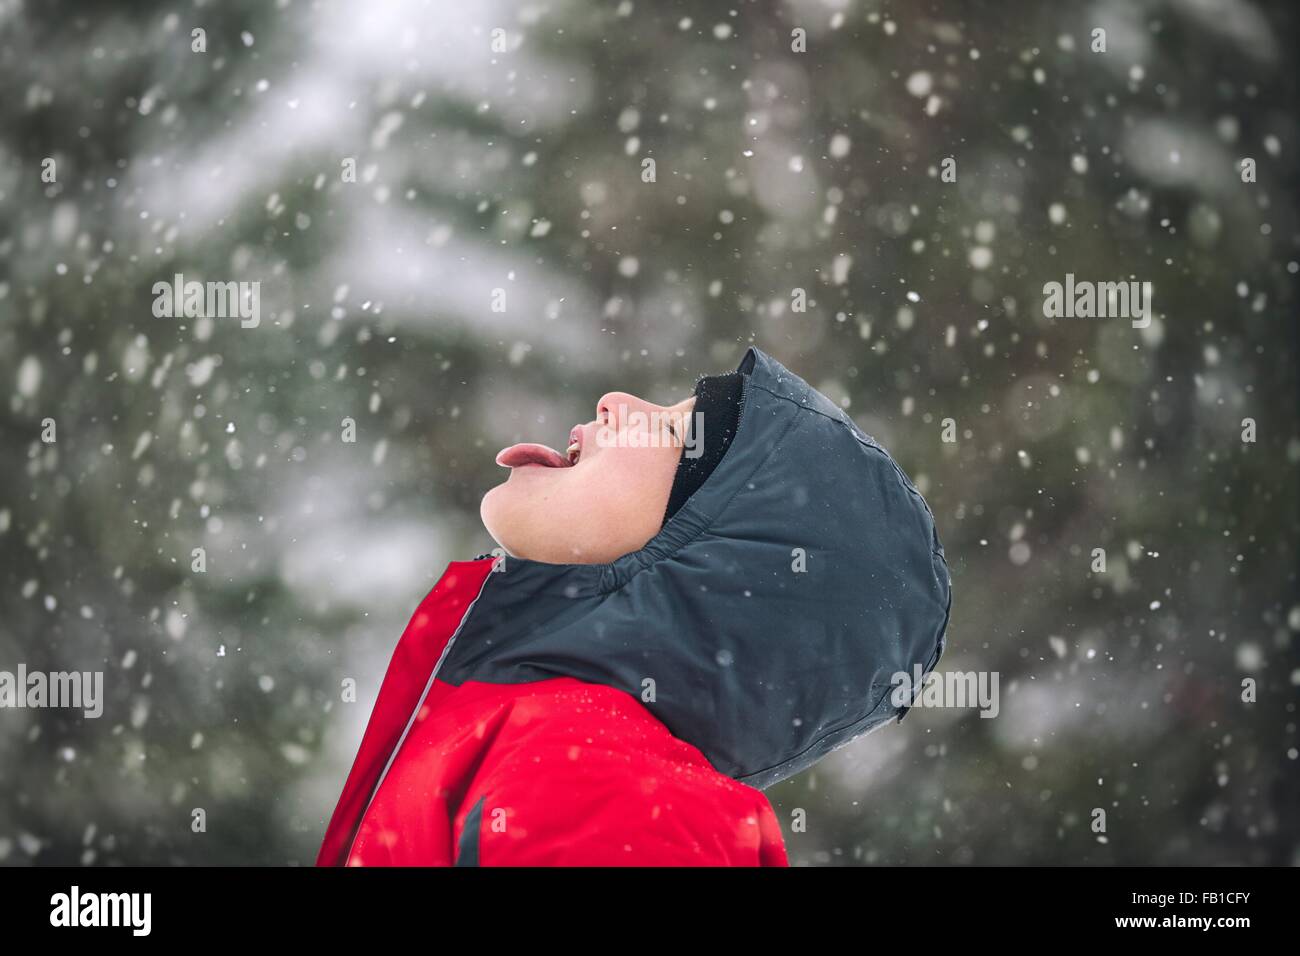 Side view of boy sticking out tongue catching snowflakes Stock Photo